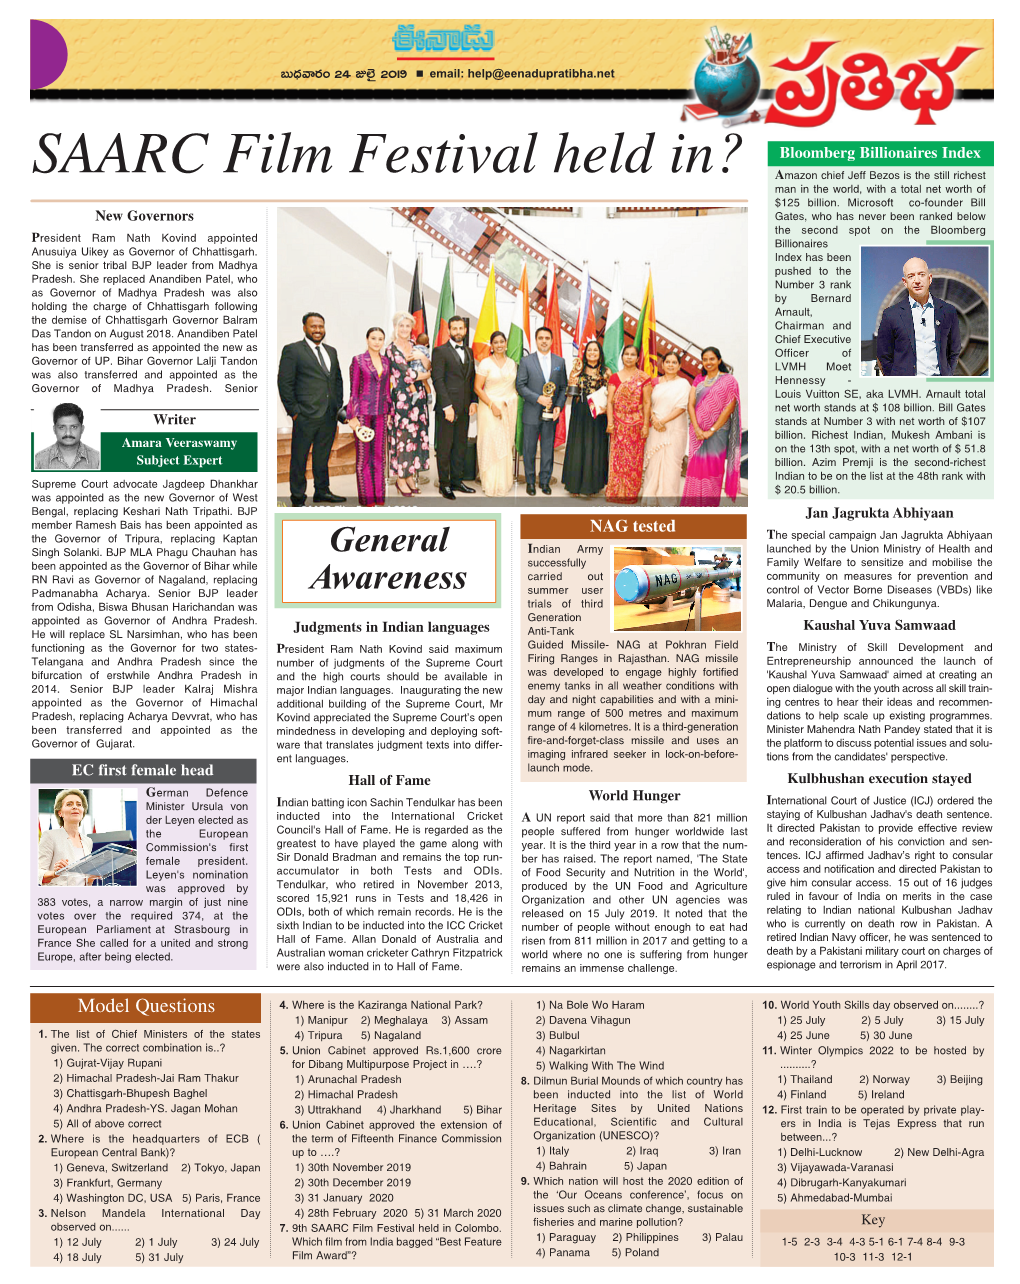 SAARC Film Festival Held In? Amazon Chief Jeff Bezos Is the Still Richest Man in the World, with a Total Net Worth of $125 Billion